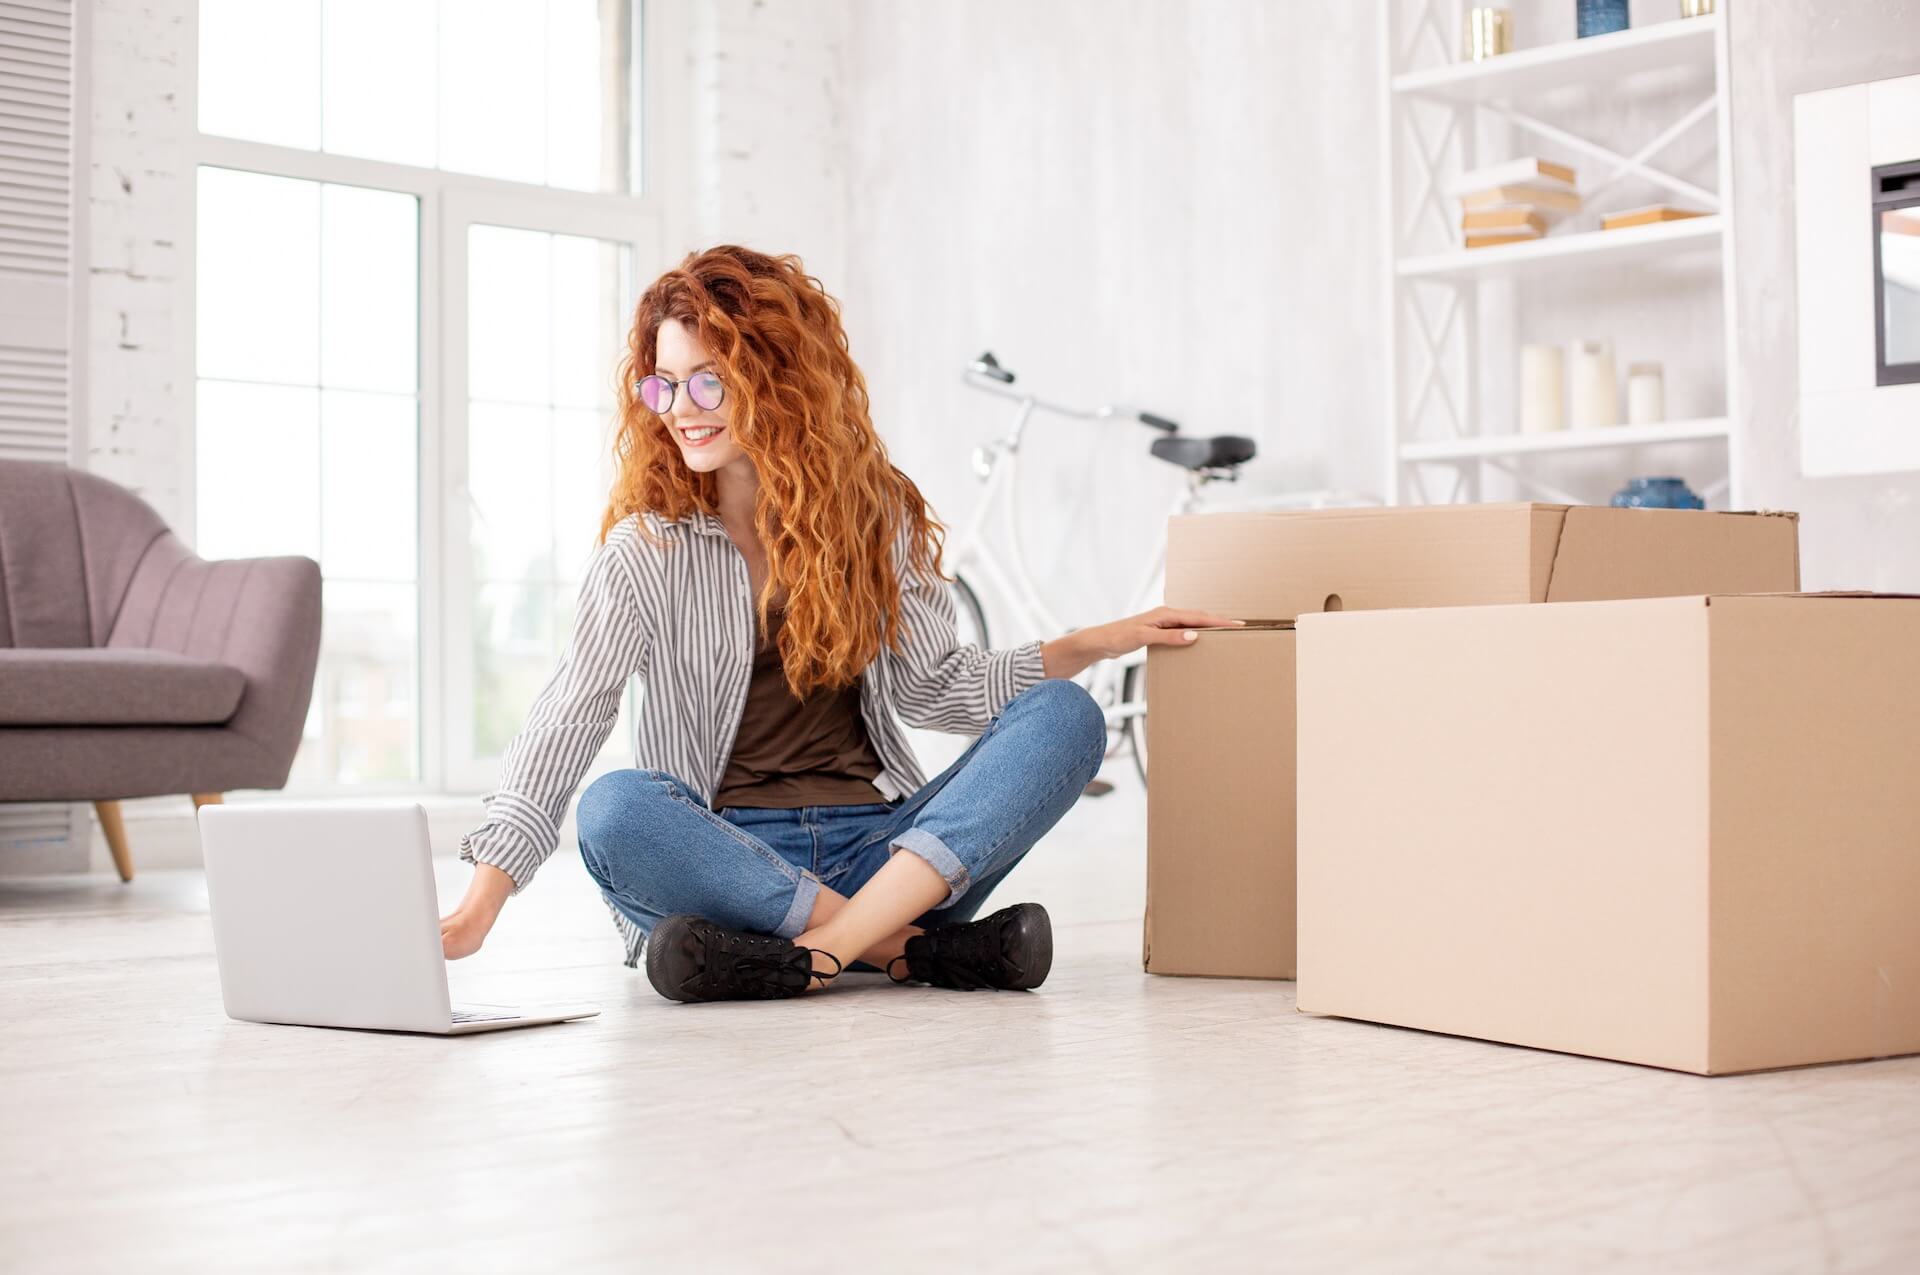 Woman sitting on the floor and looking at the laptop, boxes for moving overseas next to her